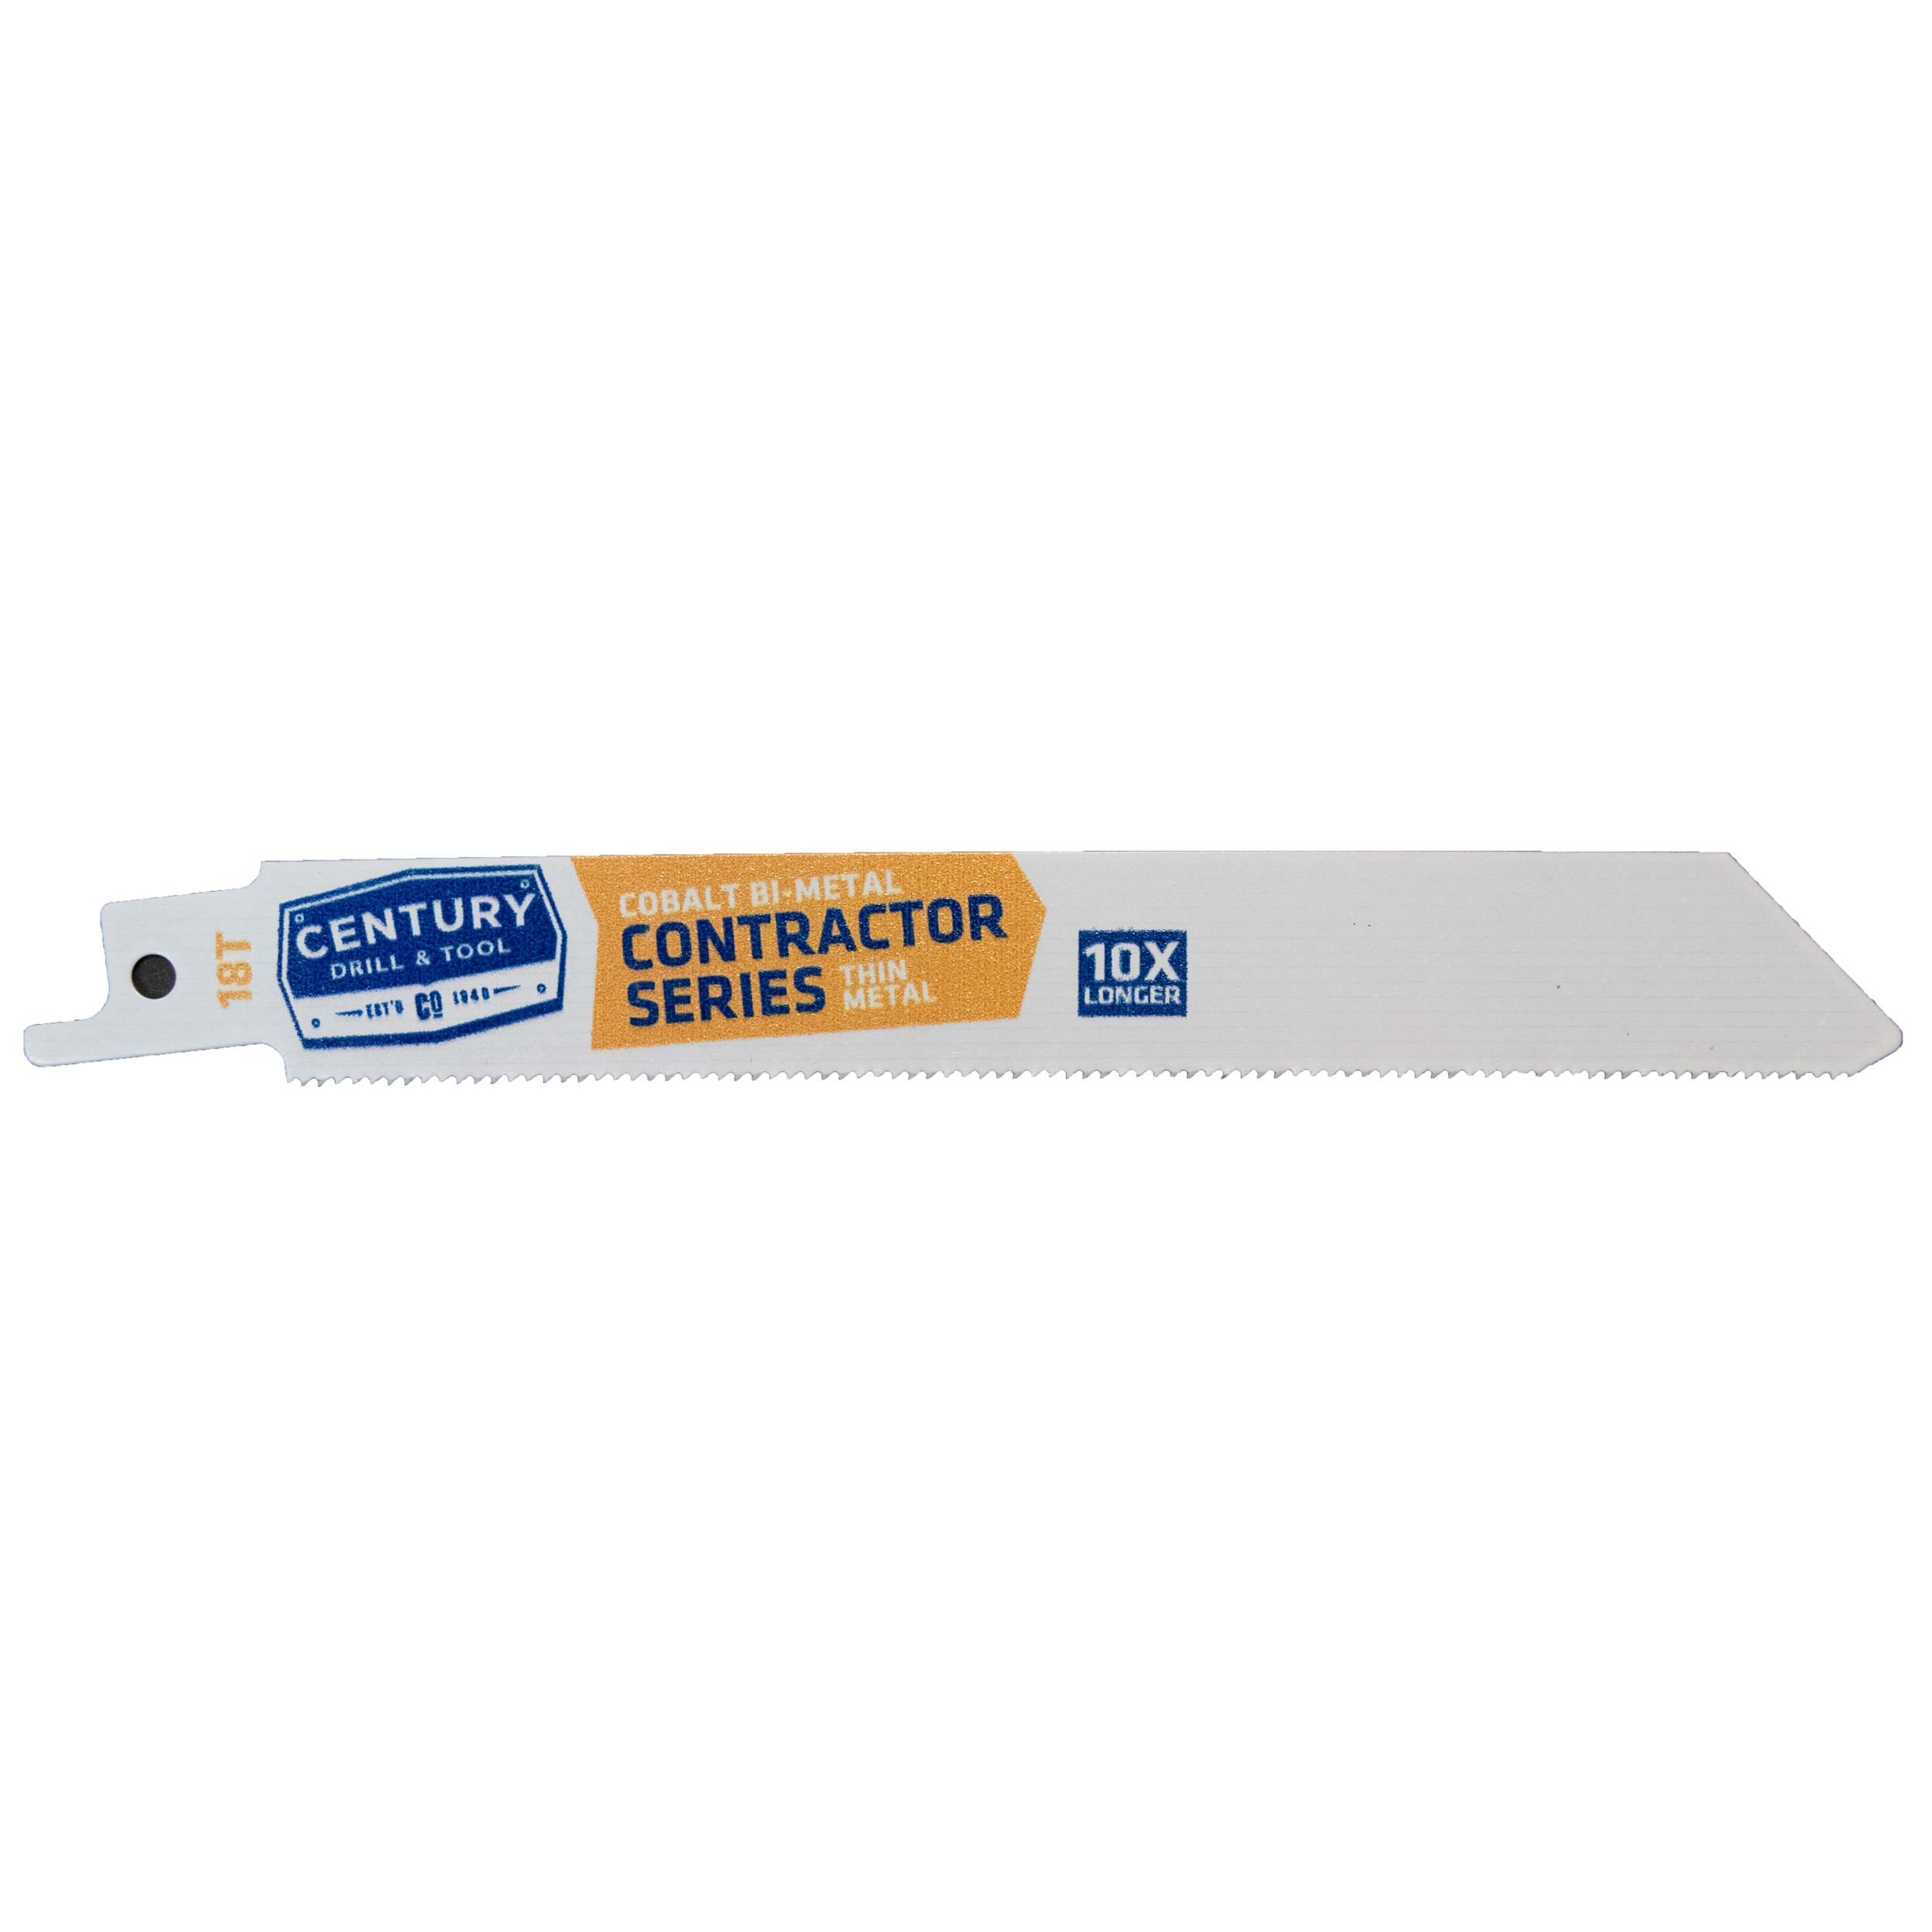 Contractor Series Reciprocating Saw Blade 18T X 6″